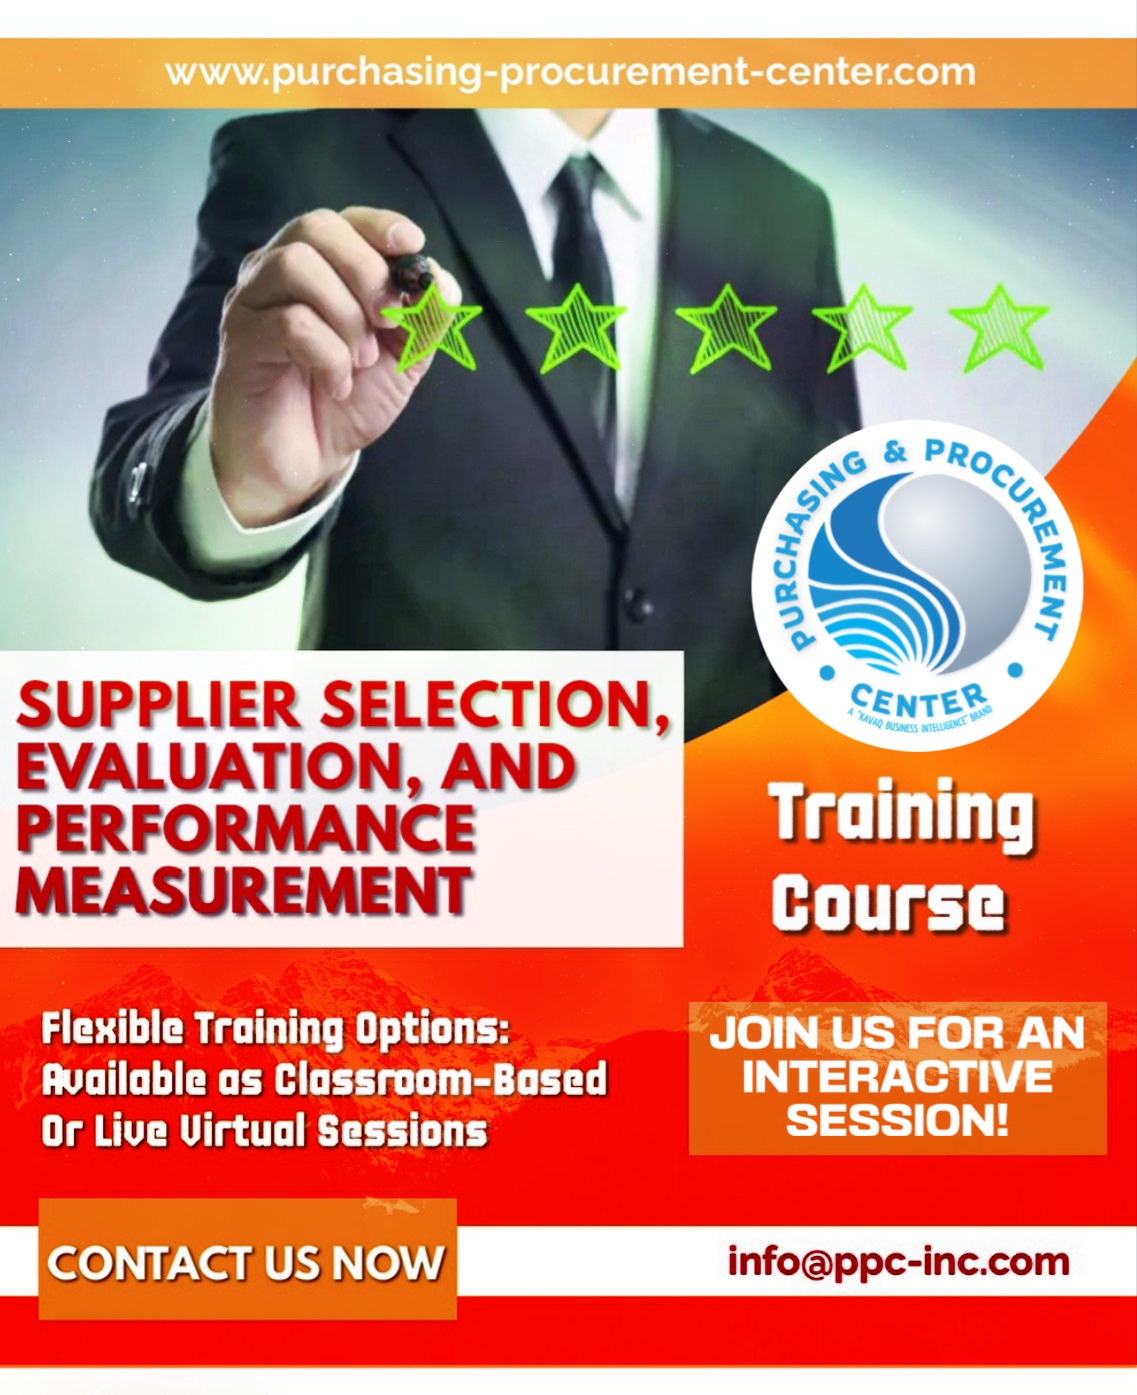 The Supplier Selection, Evaluation, and Performance Measurement course provides strategic and practical insights into achieving higher supplier performance.